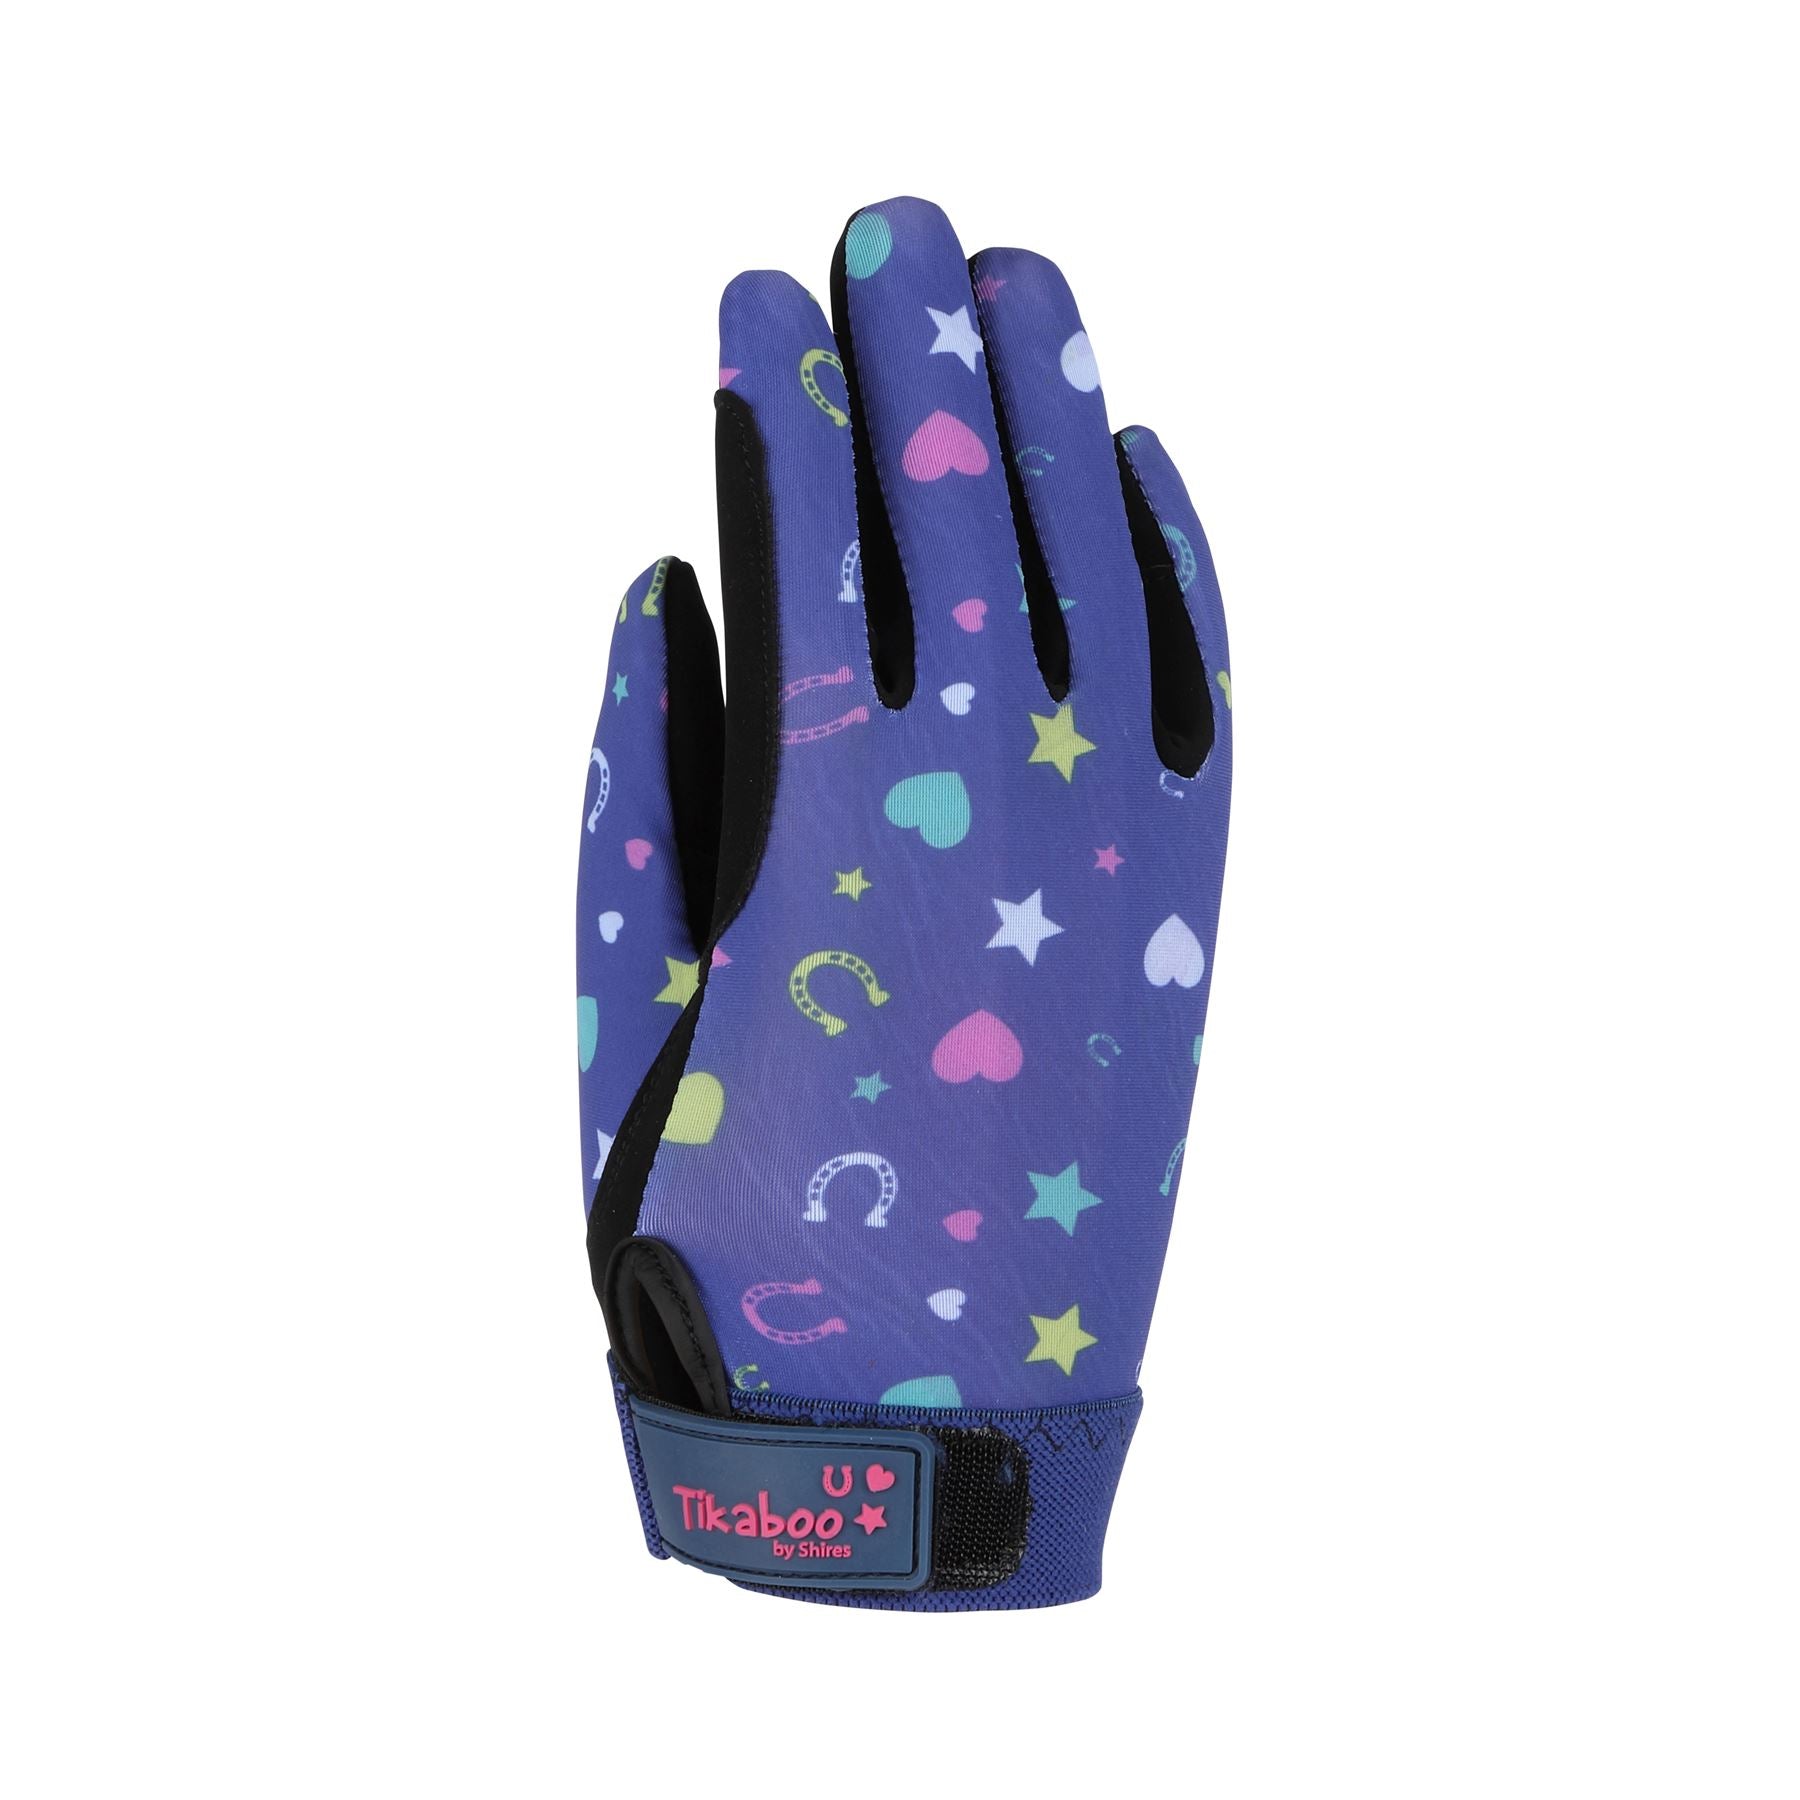 Tikaboo Riding Gloves - Child - Just Horse Riders